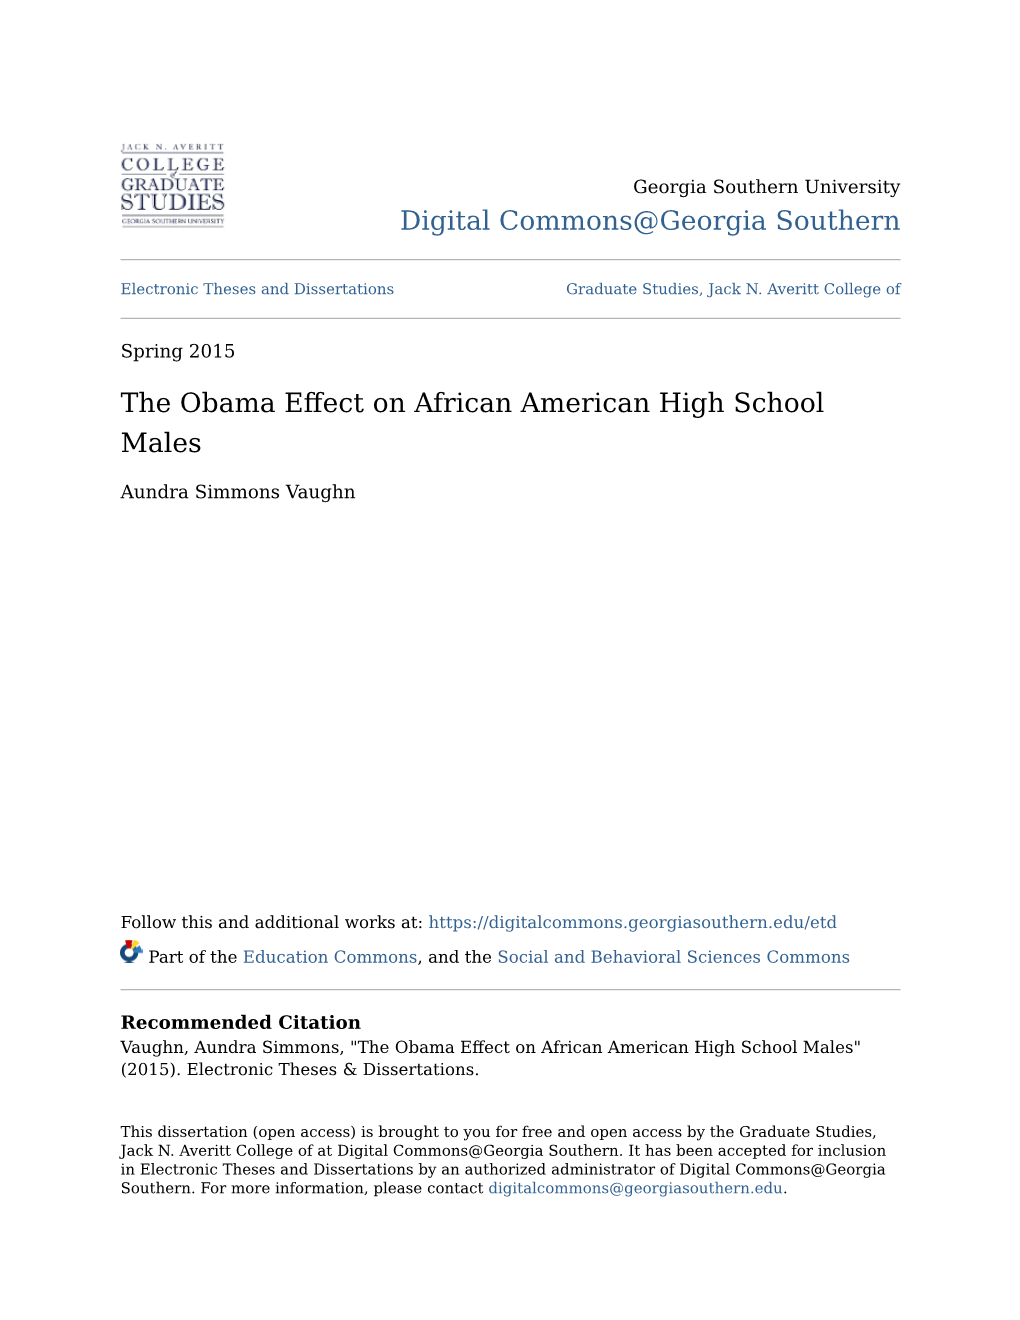 The Obama Effect on African American High School Males